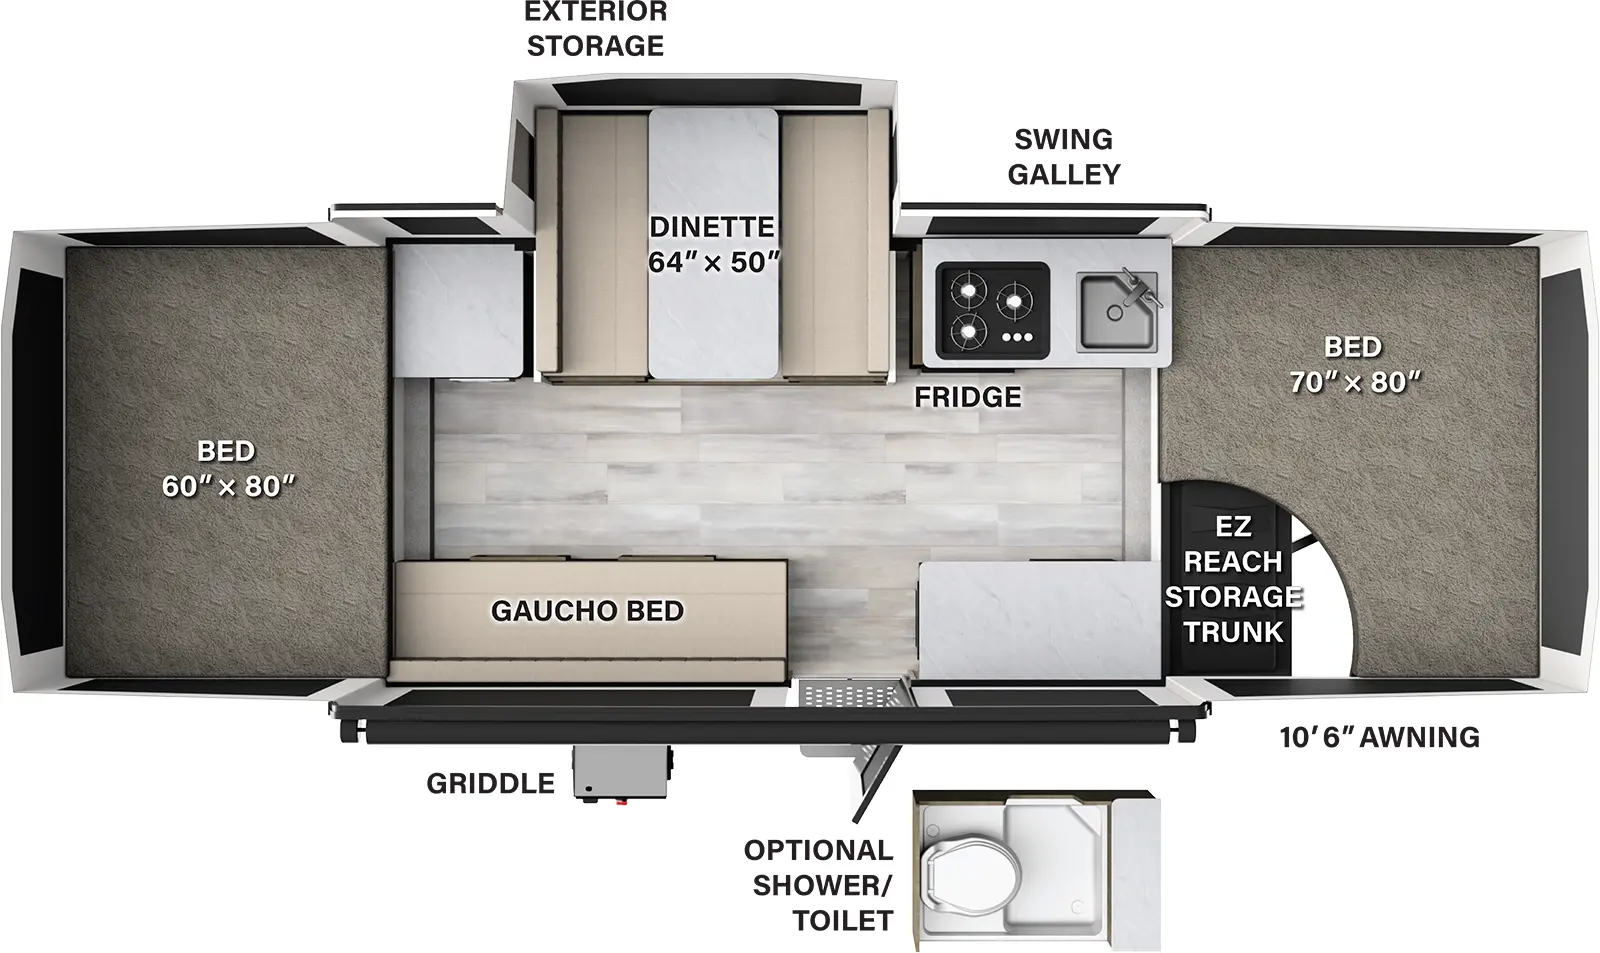 The 228SE has one slideout and one entry door. Exterior features a 10 foot 6 inch awning, griddle, exterior storage, and front EZ reach storage trunk. Interior layout front to back: front tent bed; off-door side swing galley with sink, refrigerator and cooktop, dinette slideout, and countertop; door side countertop, entry, and gaucho bed; rear tent bed. Optional shower/toilet available.